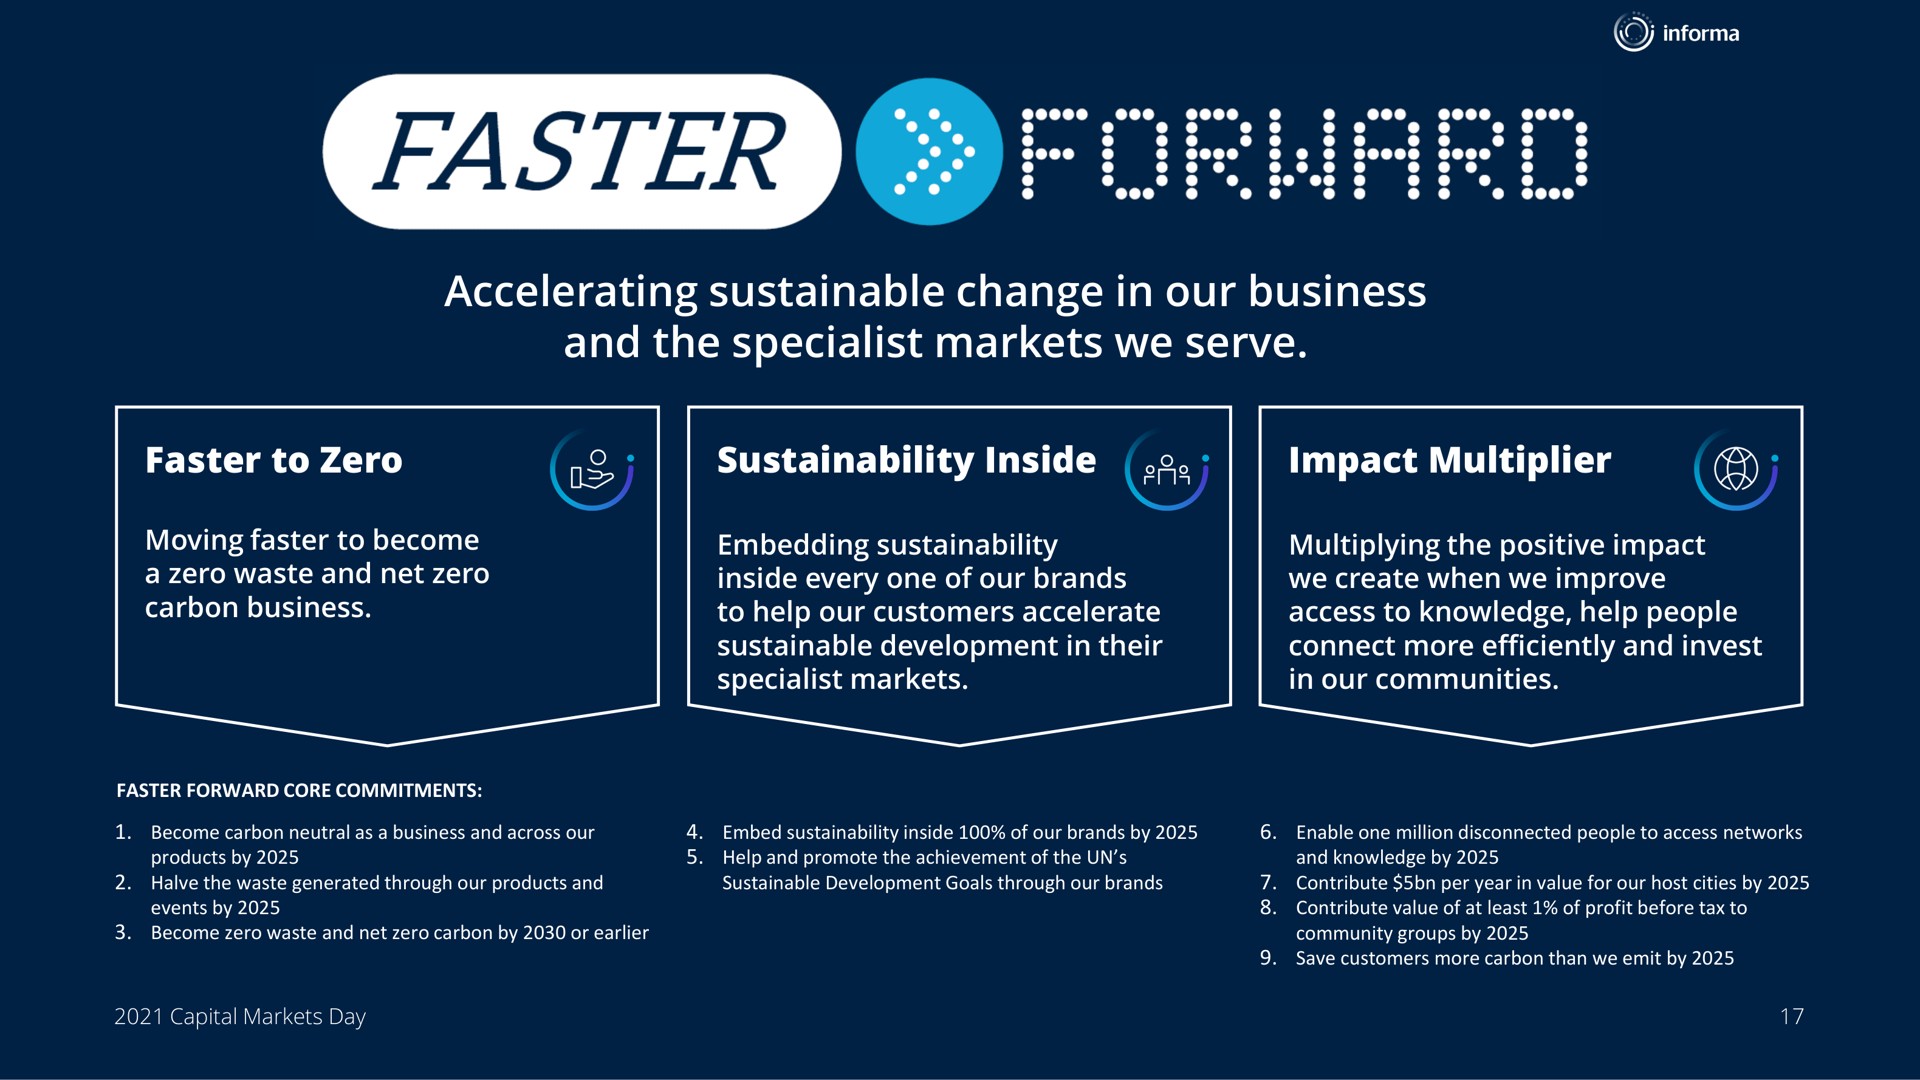 faster accelerating sustainable change in our business and the specialist markets we serve | Informa